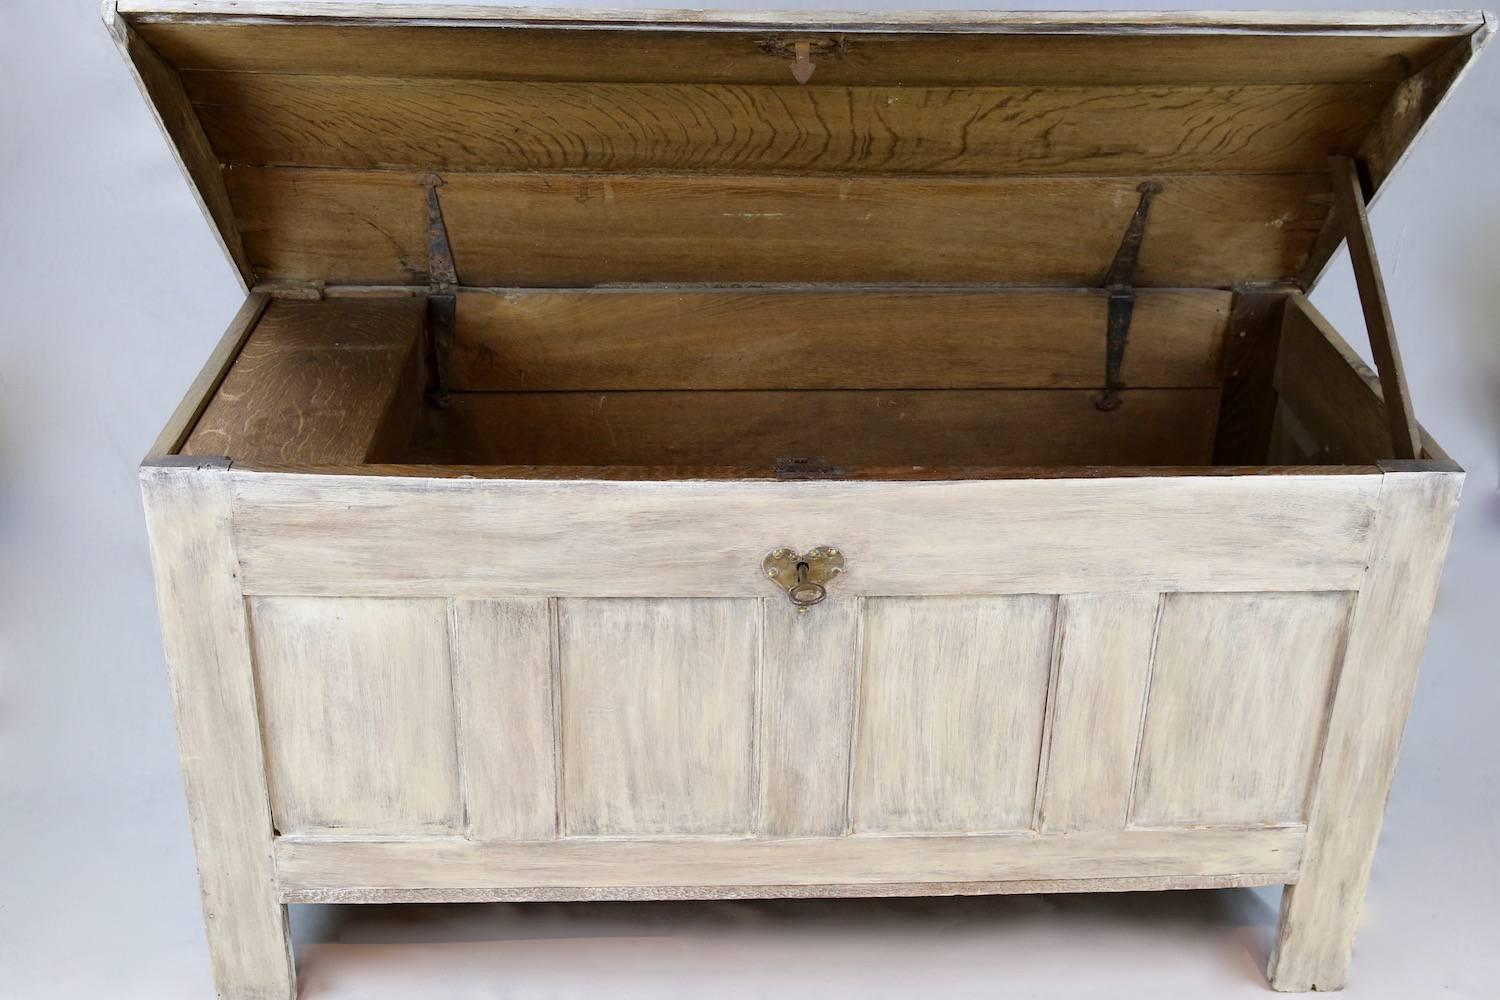 Late 17th-Early 18th Century English Oak Coffer In Good Condition For Sale In Henley-on-Thames, Oxfordshire